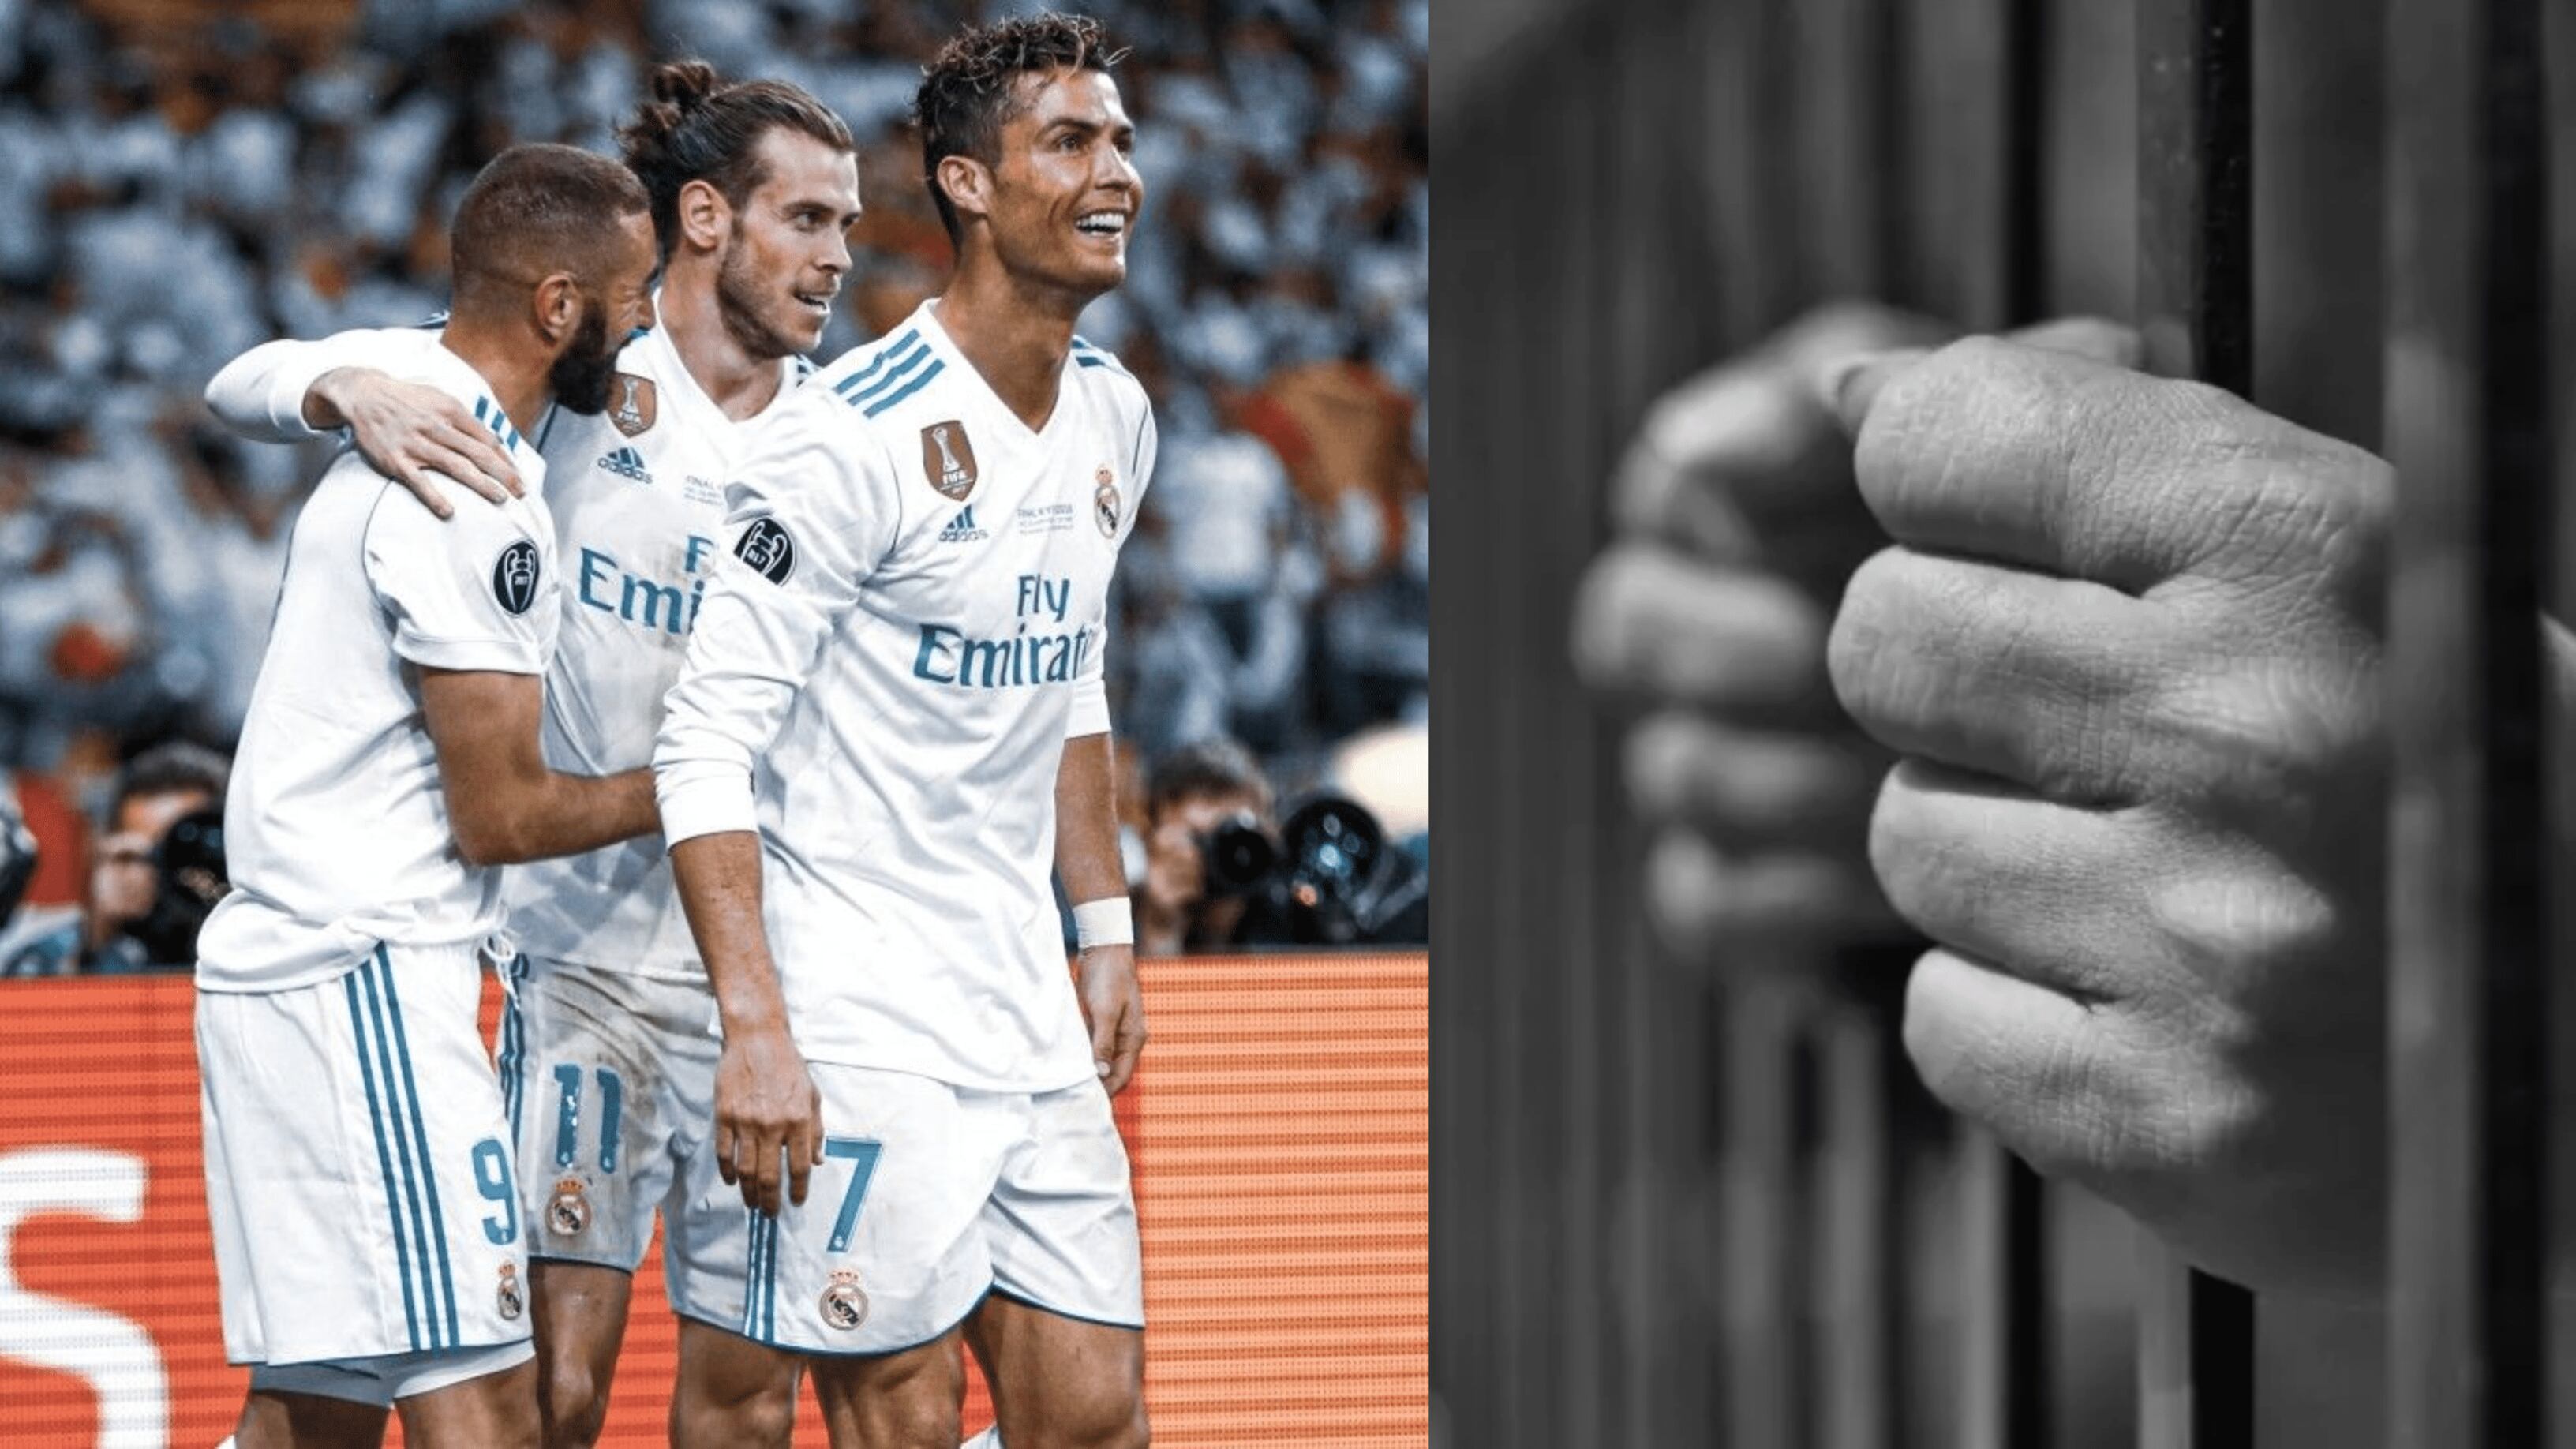 He was an idol of Real Madrid and humilliated Barcelona, now he's locked up behind bars